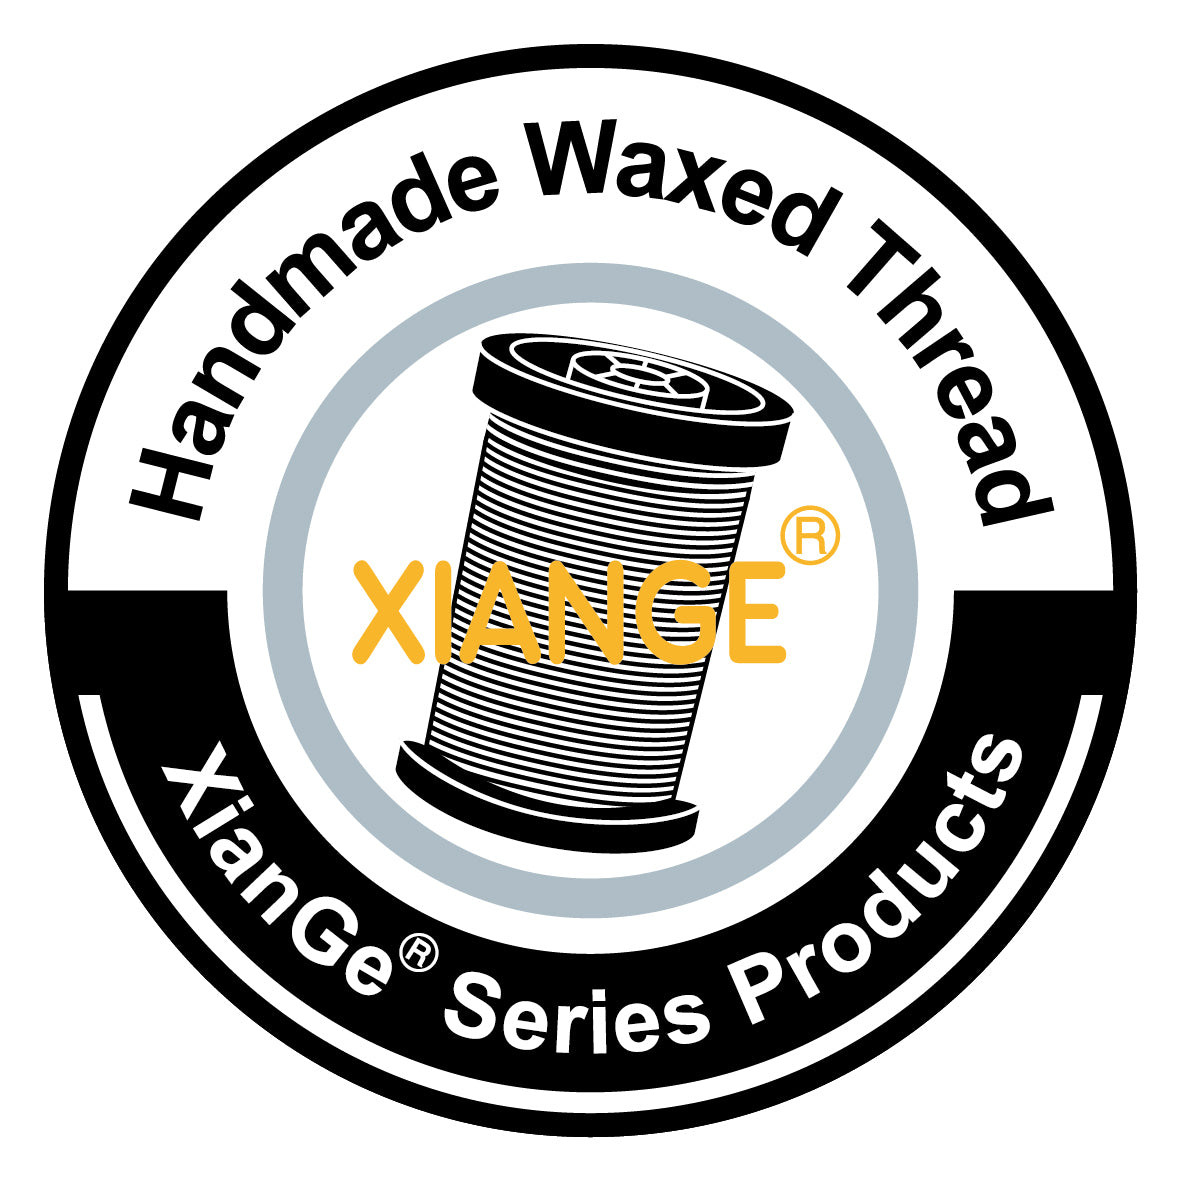 XianGe Waxed Polyester